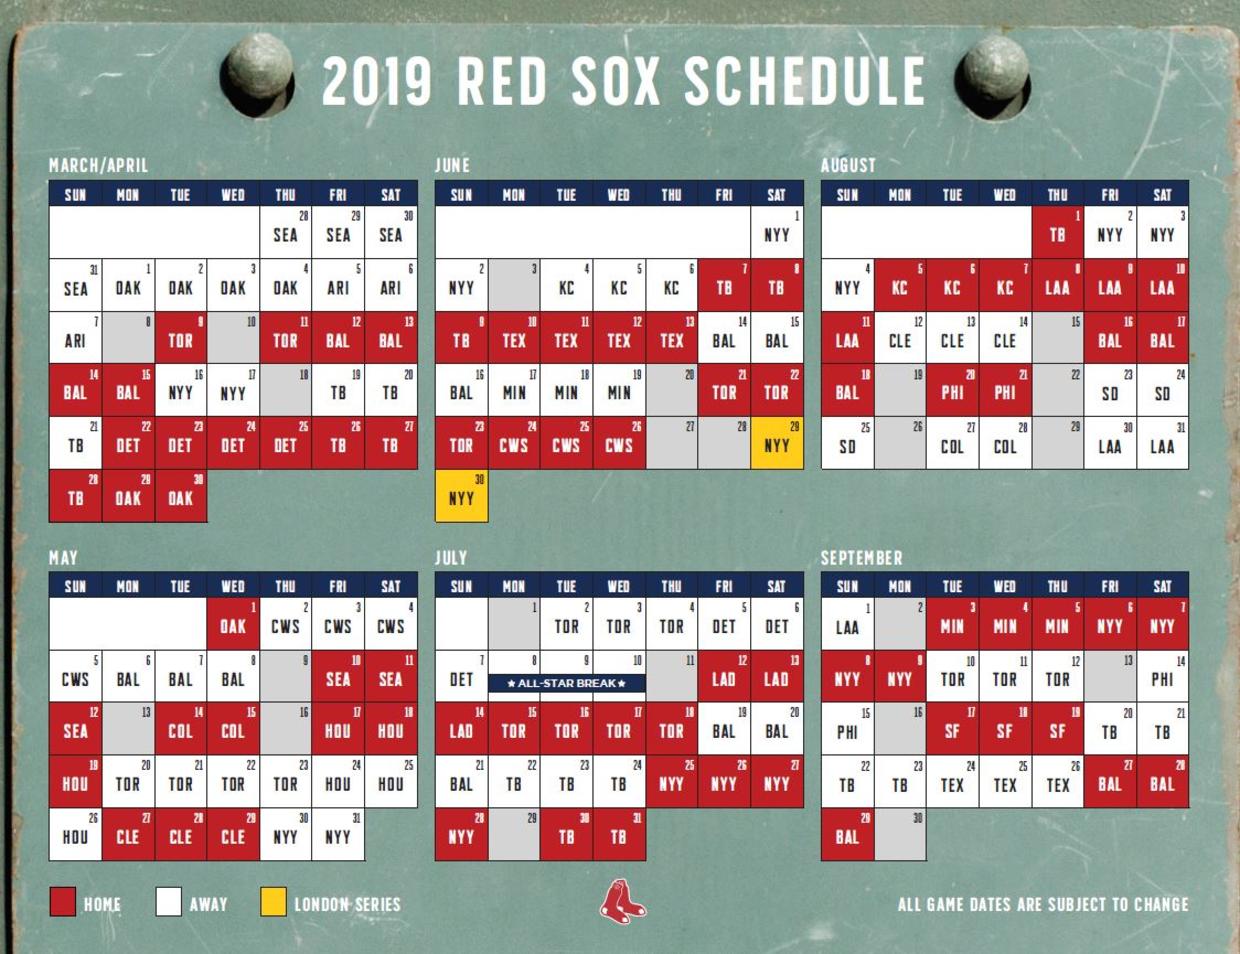 Red Sox 2019 Schedule Announced: Opening Day, London Games, World Series Rematch, Yankees Series